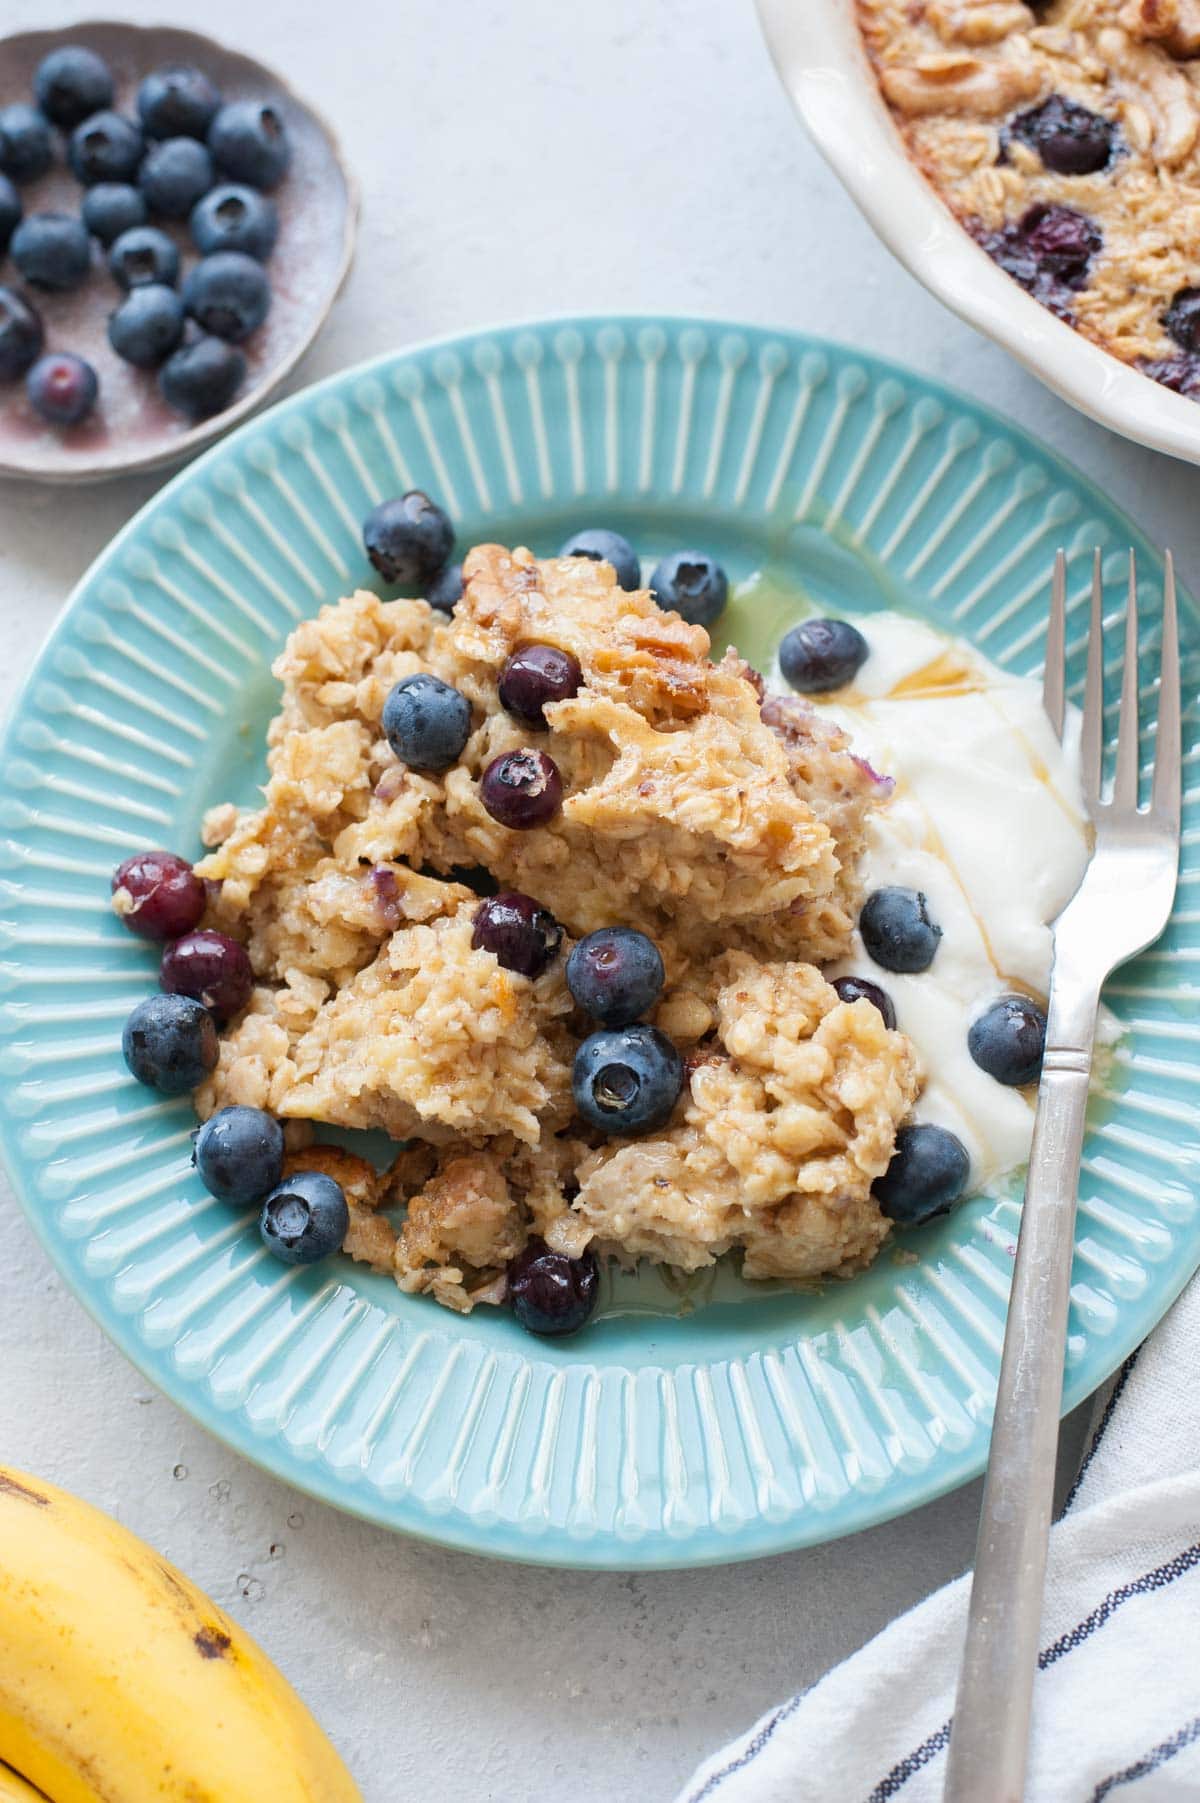 Banana Blueberry Baked Oatmeal (video) - Everyday Delicious